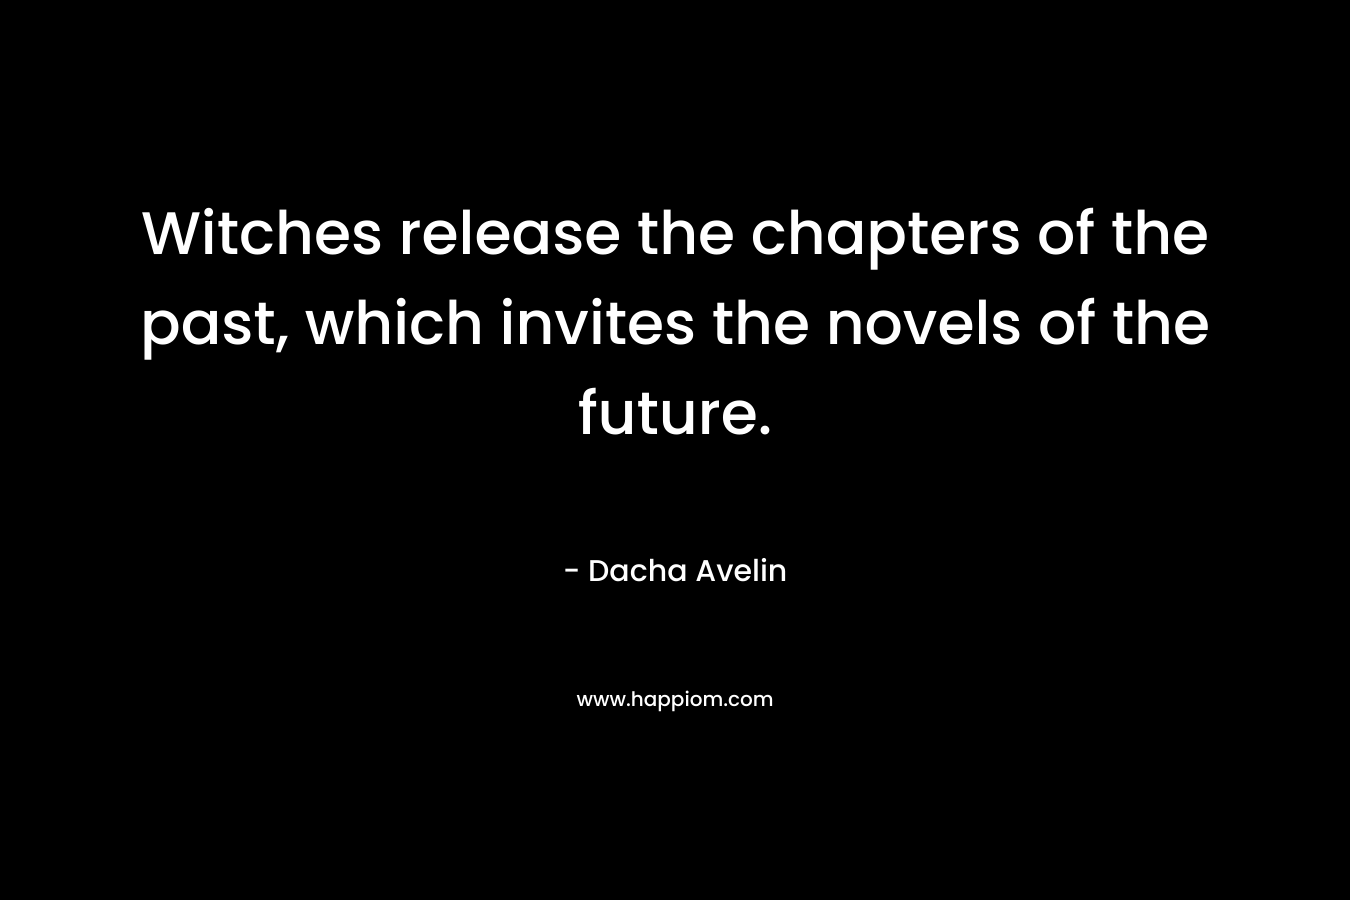 Witches release the chapters of the past, which invites the novels of the future. – Dacha Avelin